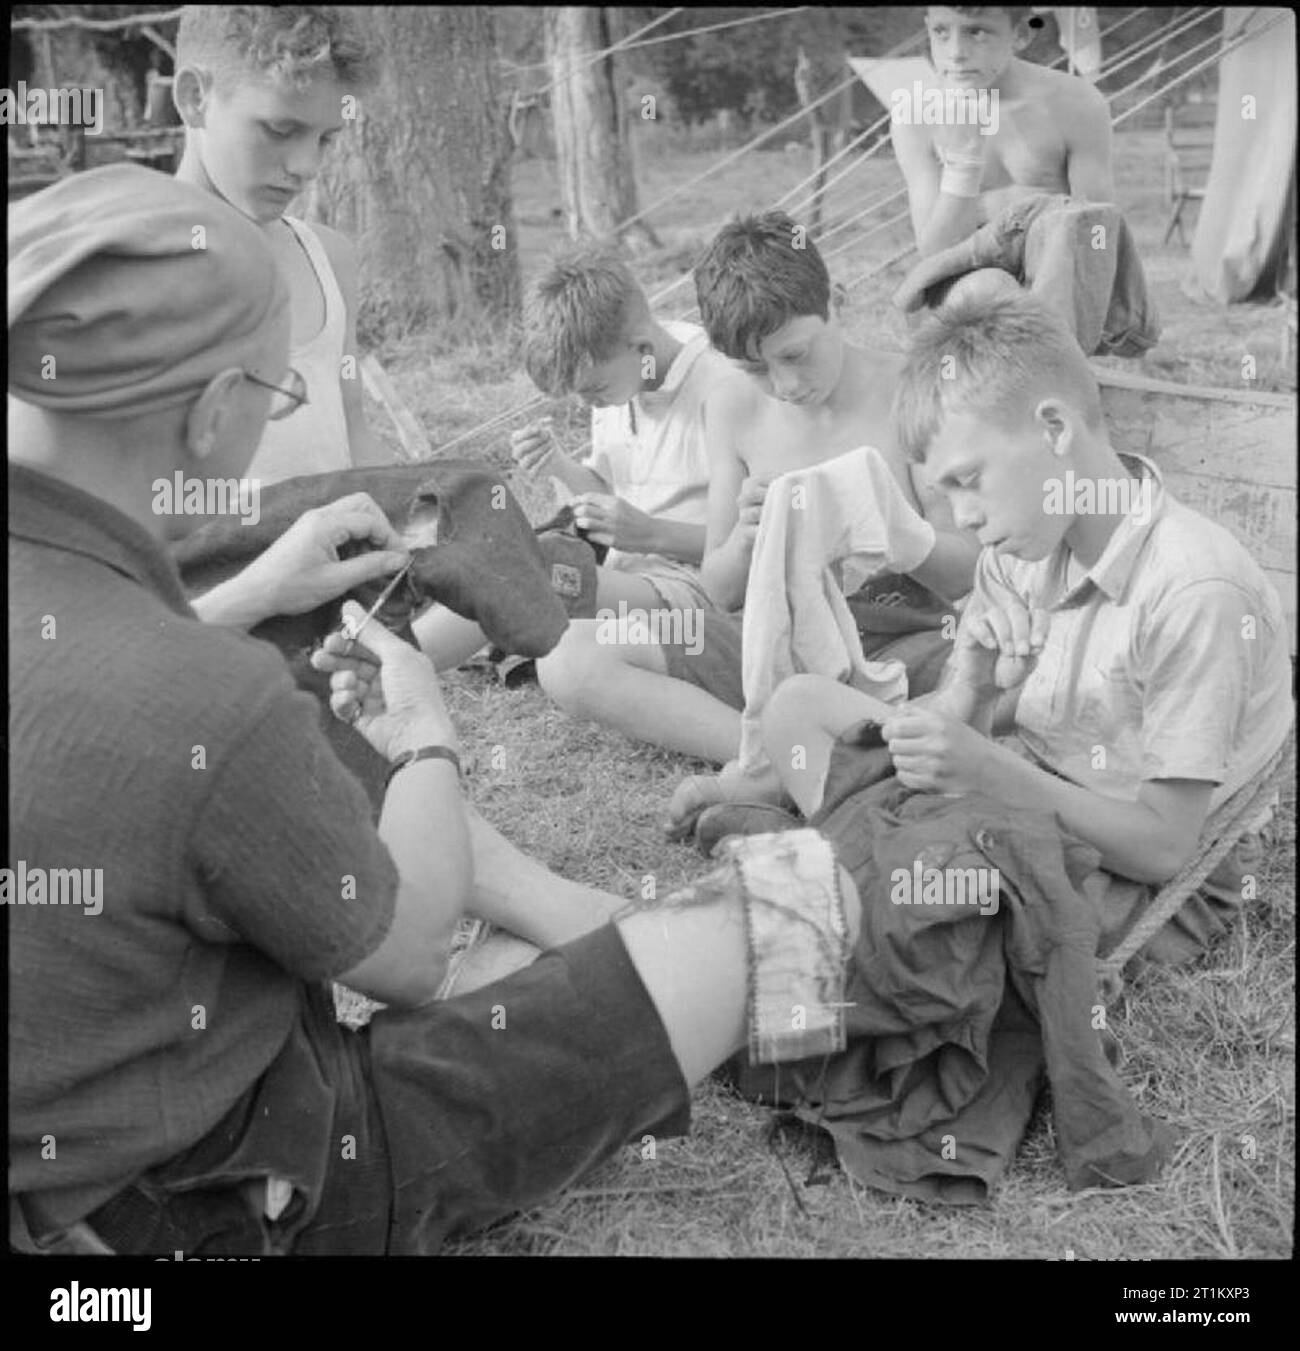 Boy Scouts Pick Fruit For Jam- Life on a Fruit-picking Camp Near Cambridge, England, UK, 1943 A small group of Boy Scouts patch and mend their clothes, assisted by the Scout Master (left), at a fruit-picking camp near Cambridge. Stock Photo